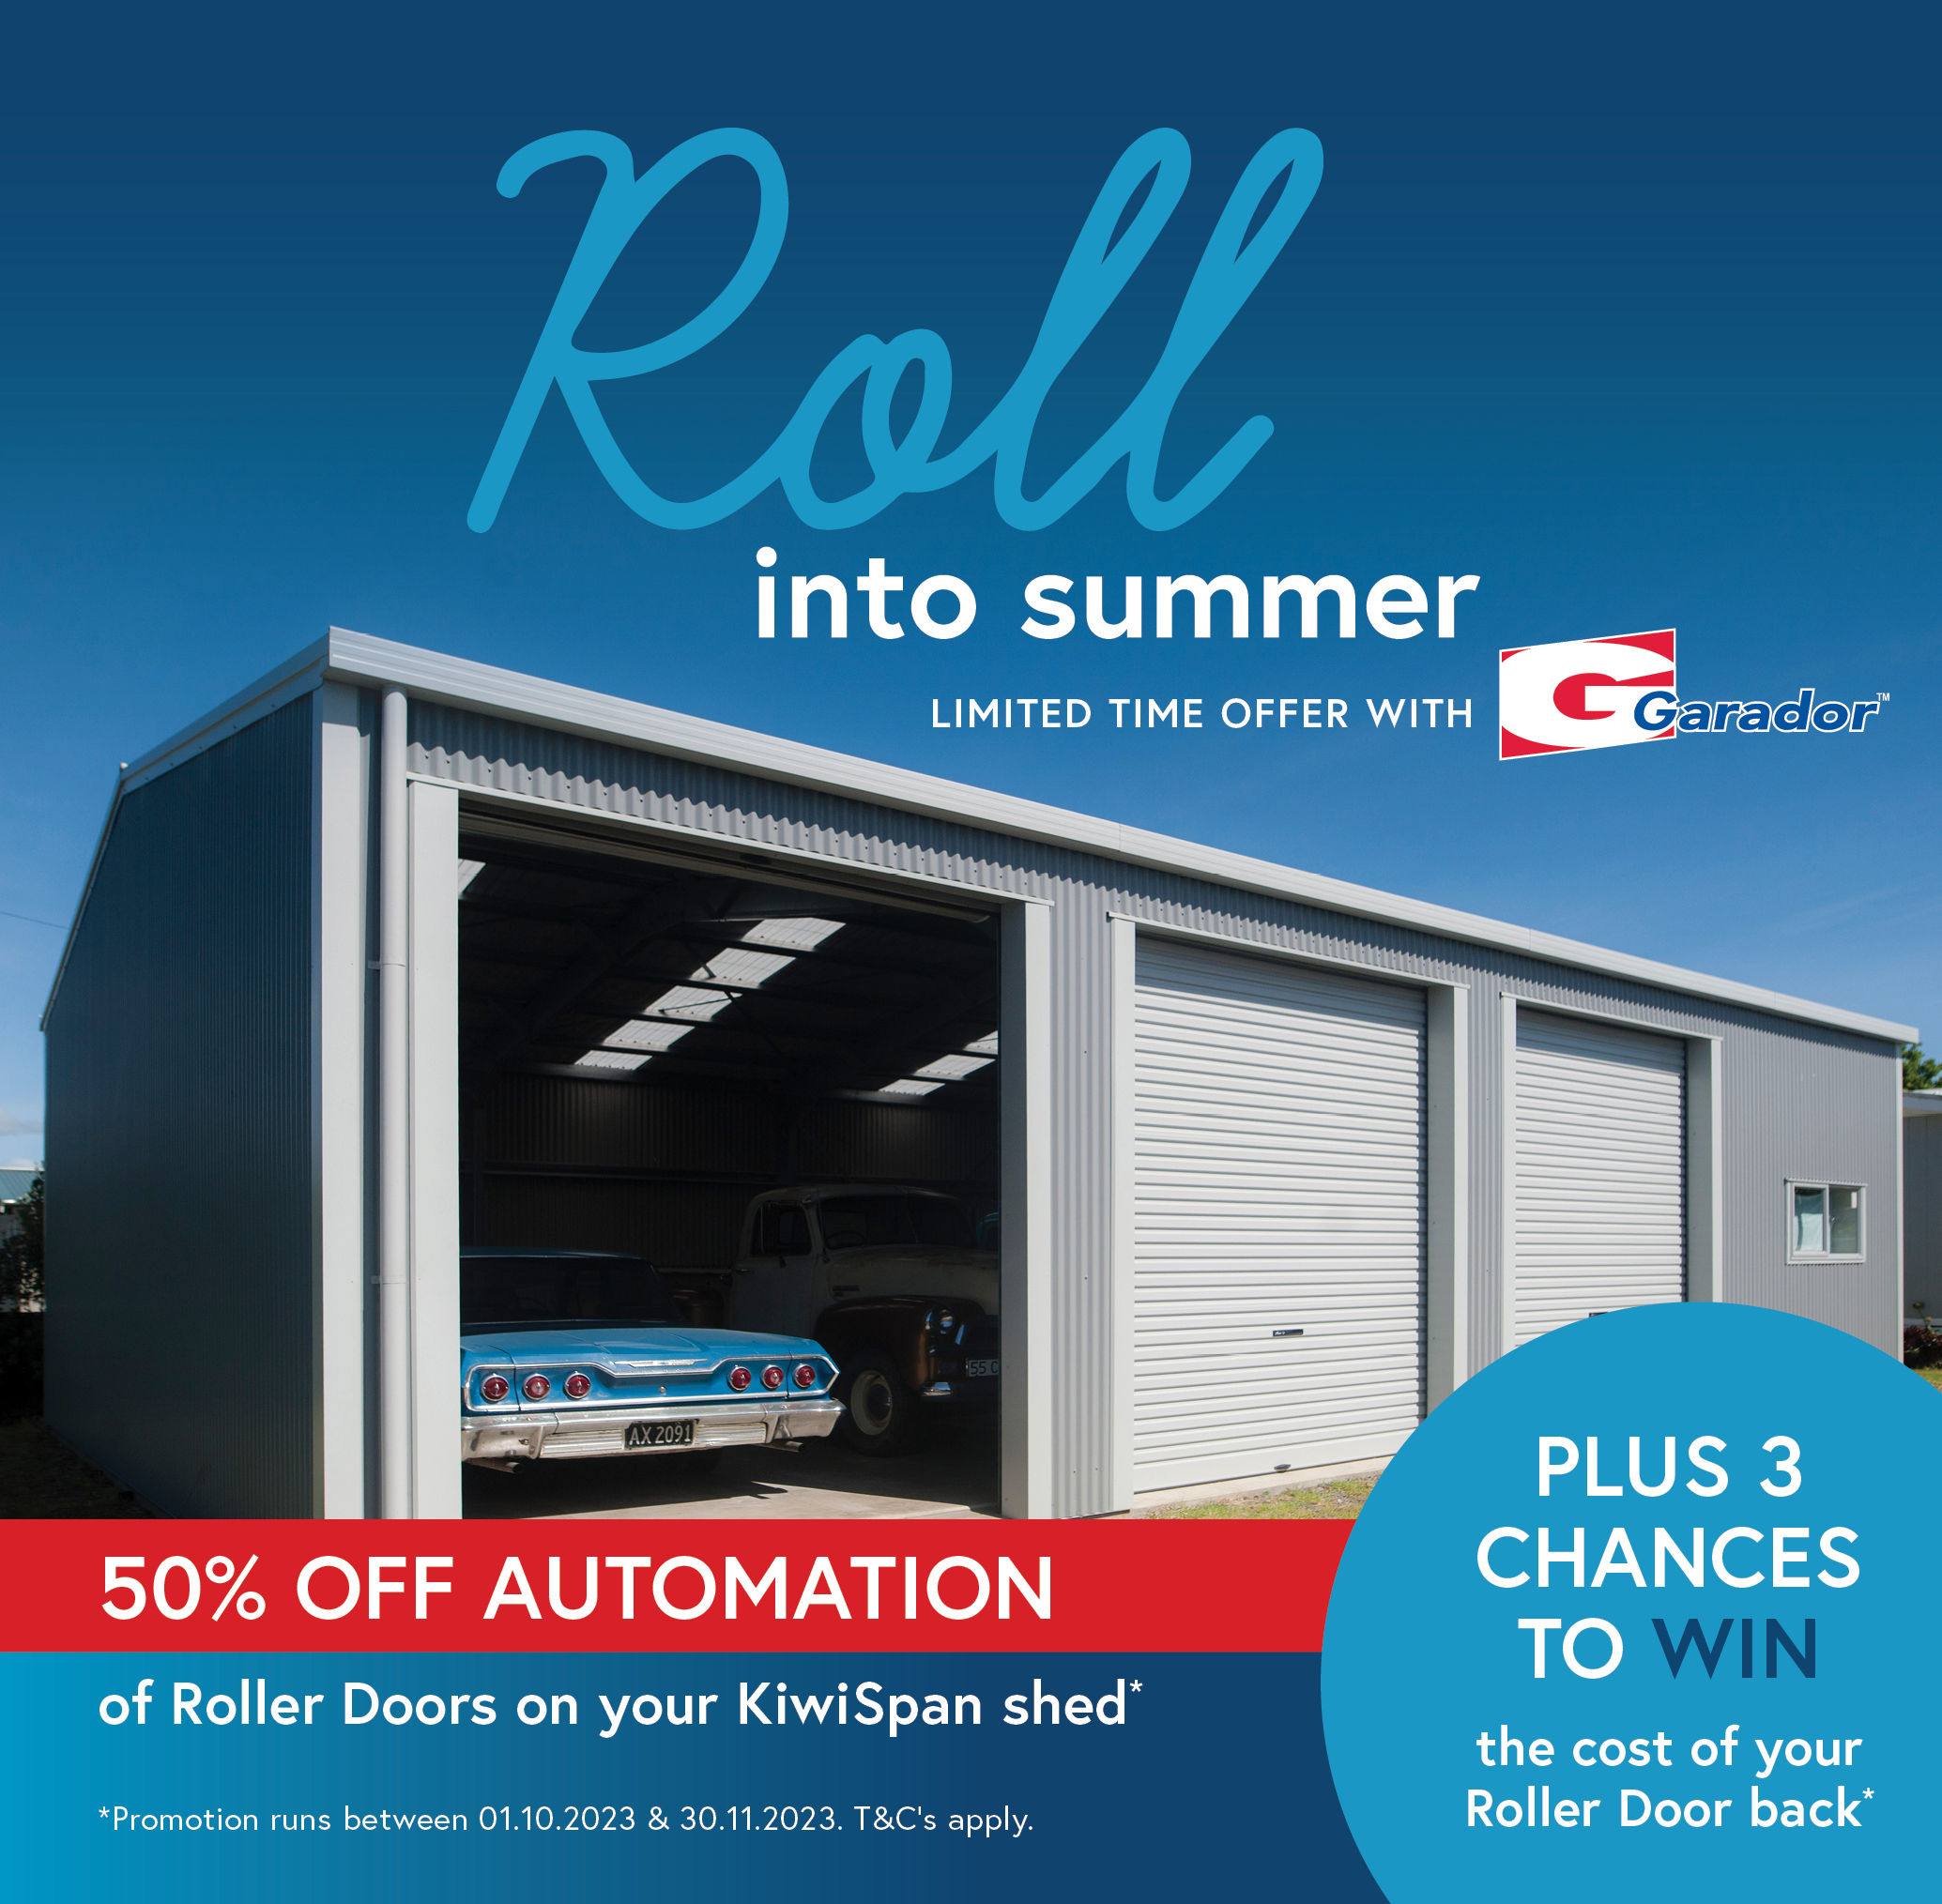 roll into summer with 50% off automation on your kiwispan shed doors